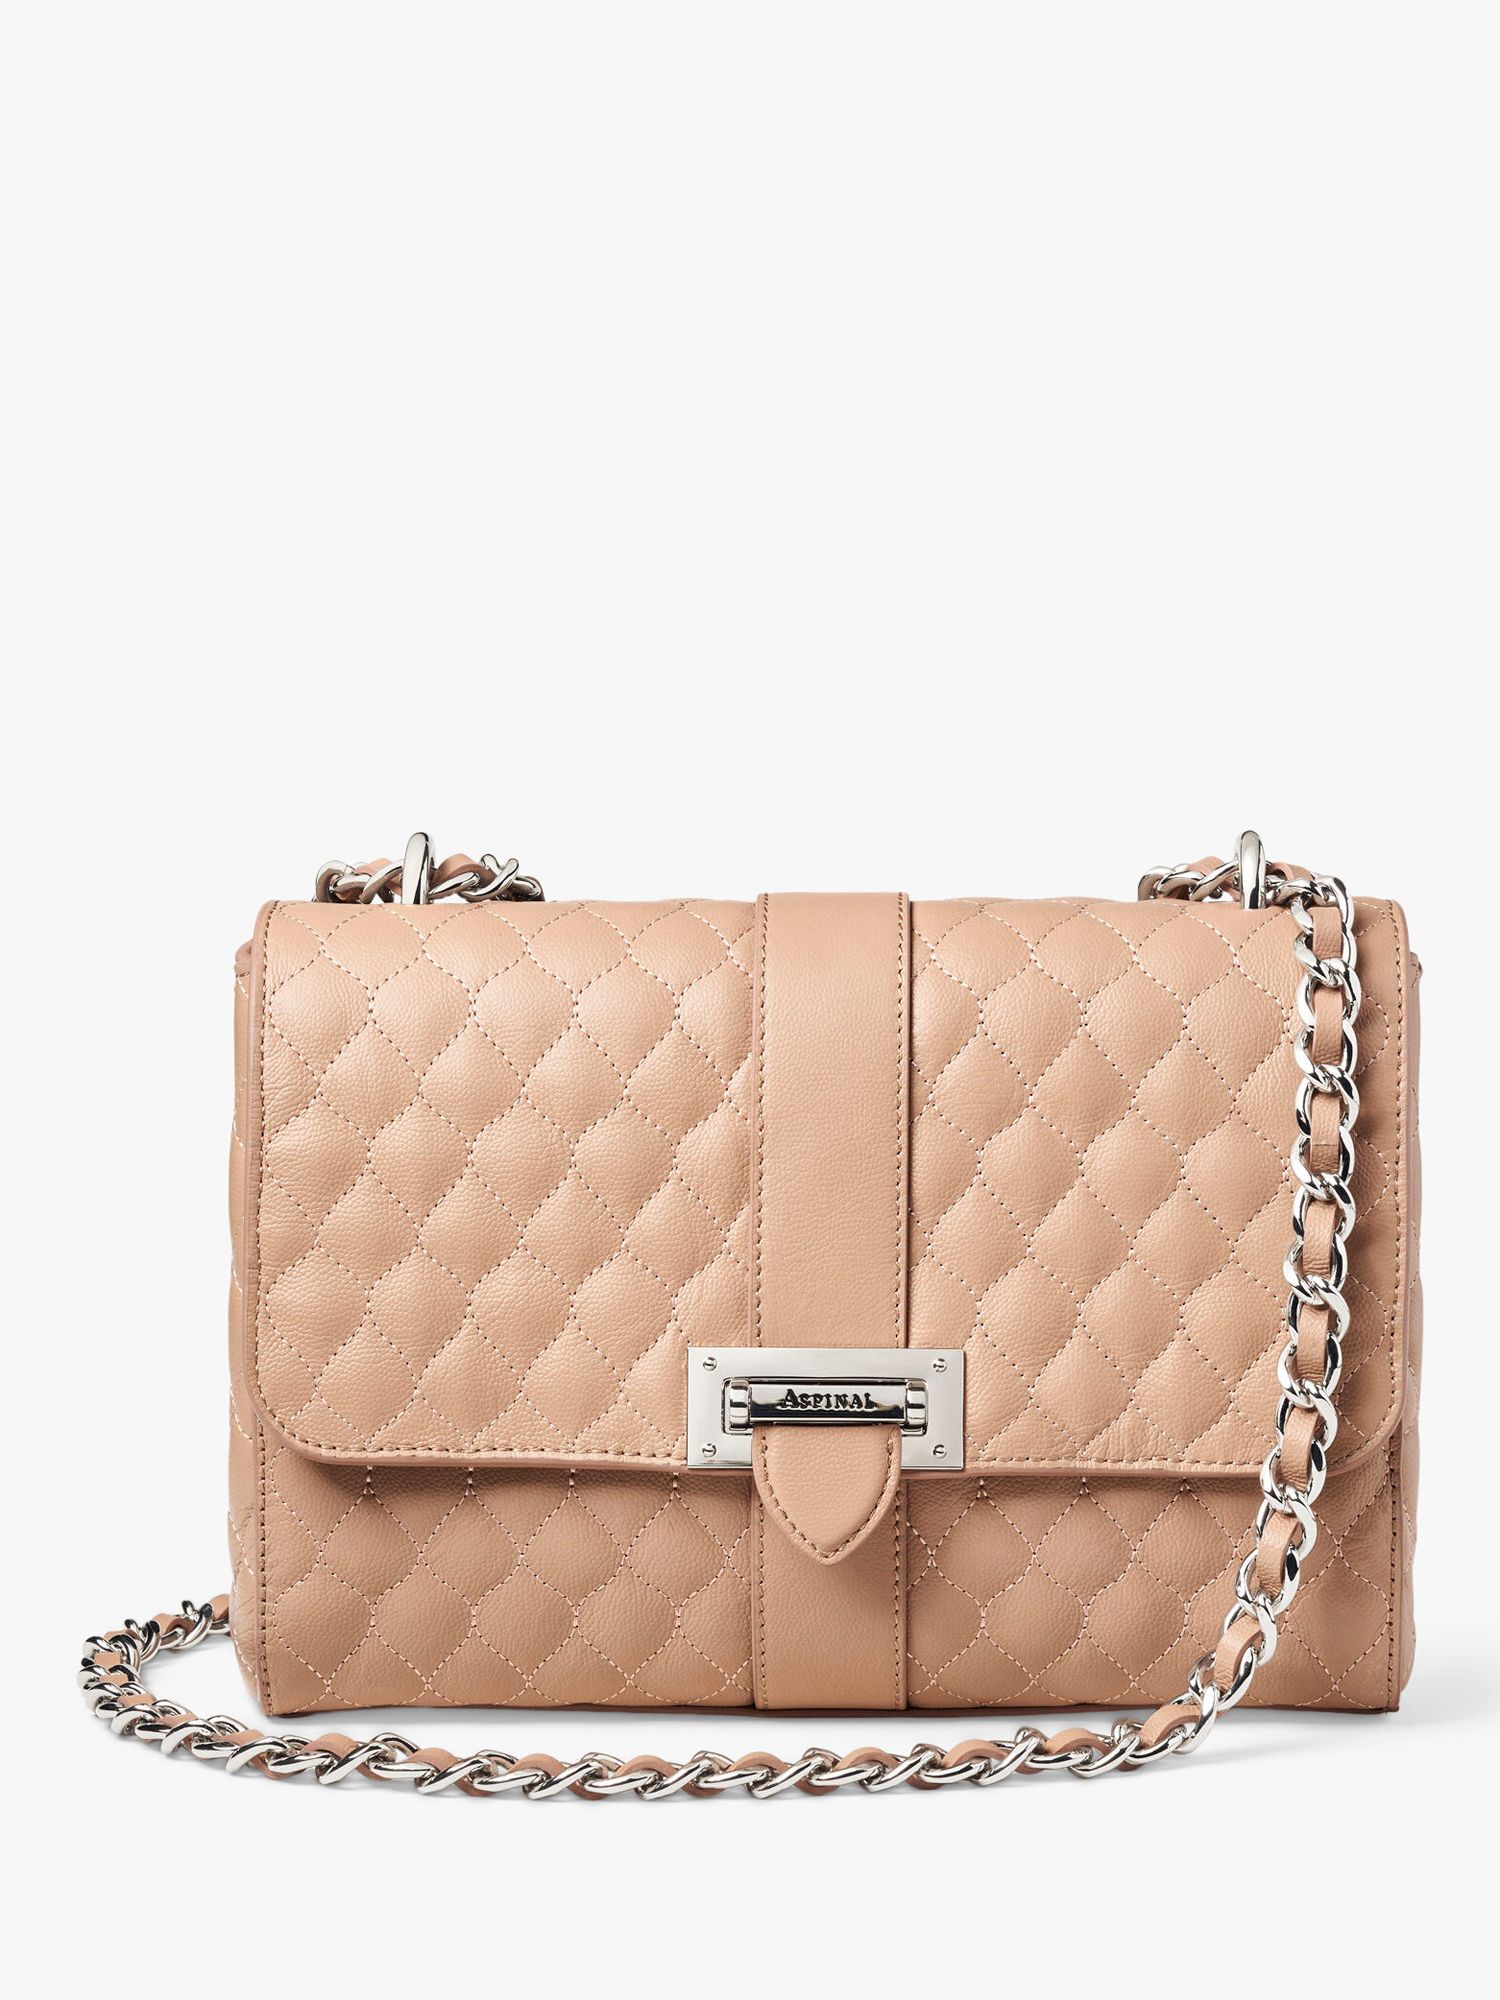 Aspinal of London Lottie Large Quilted Pebble Leather Shoulder Bag, Soft  Taupe at John Lewis & Partners